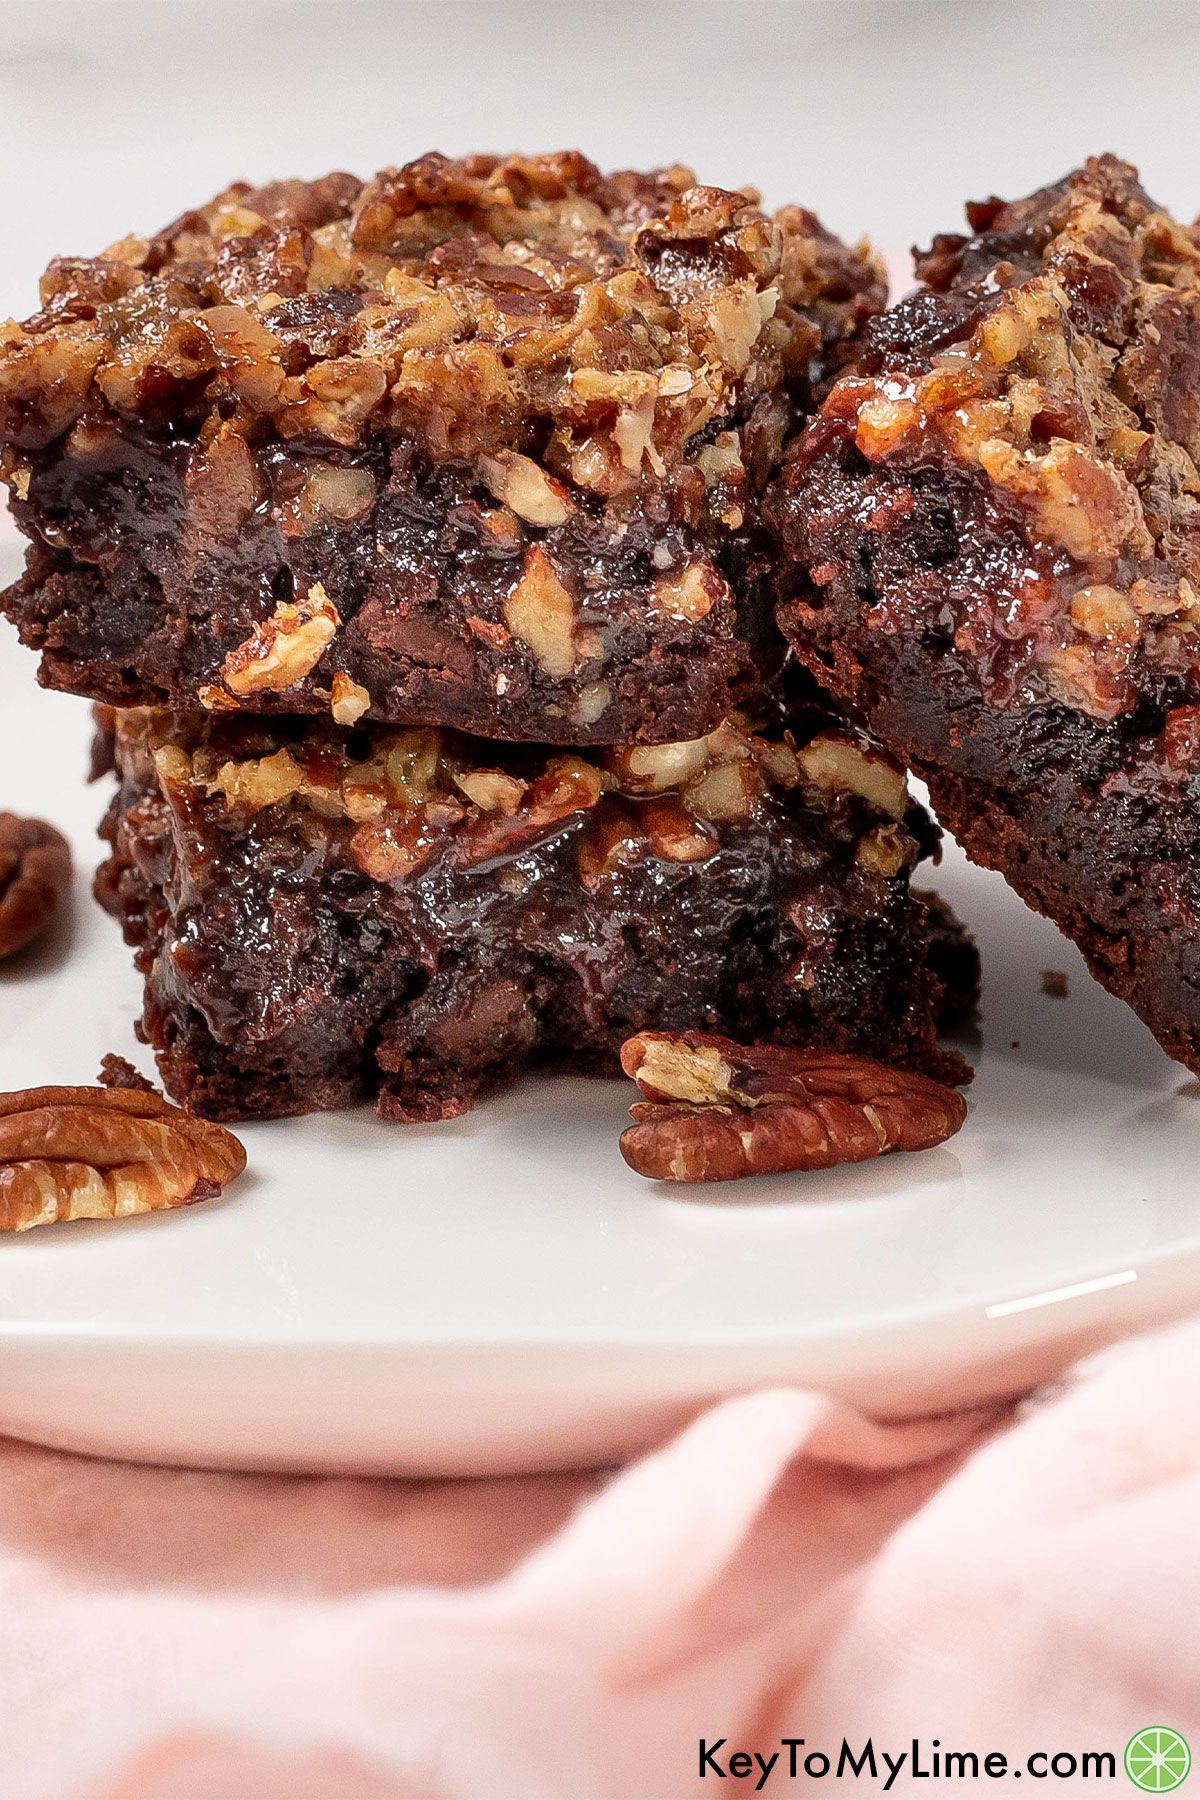 A close up image of a stack of pecan pie brownies.